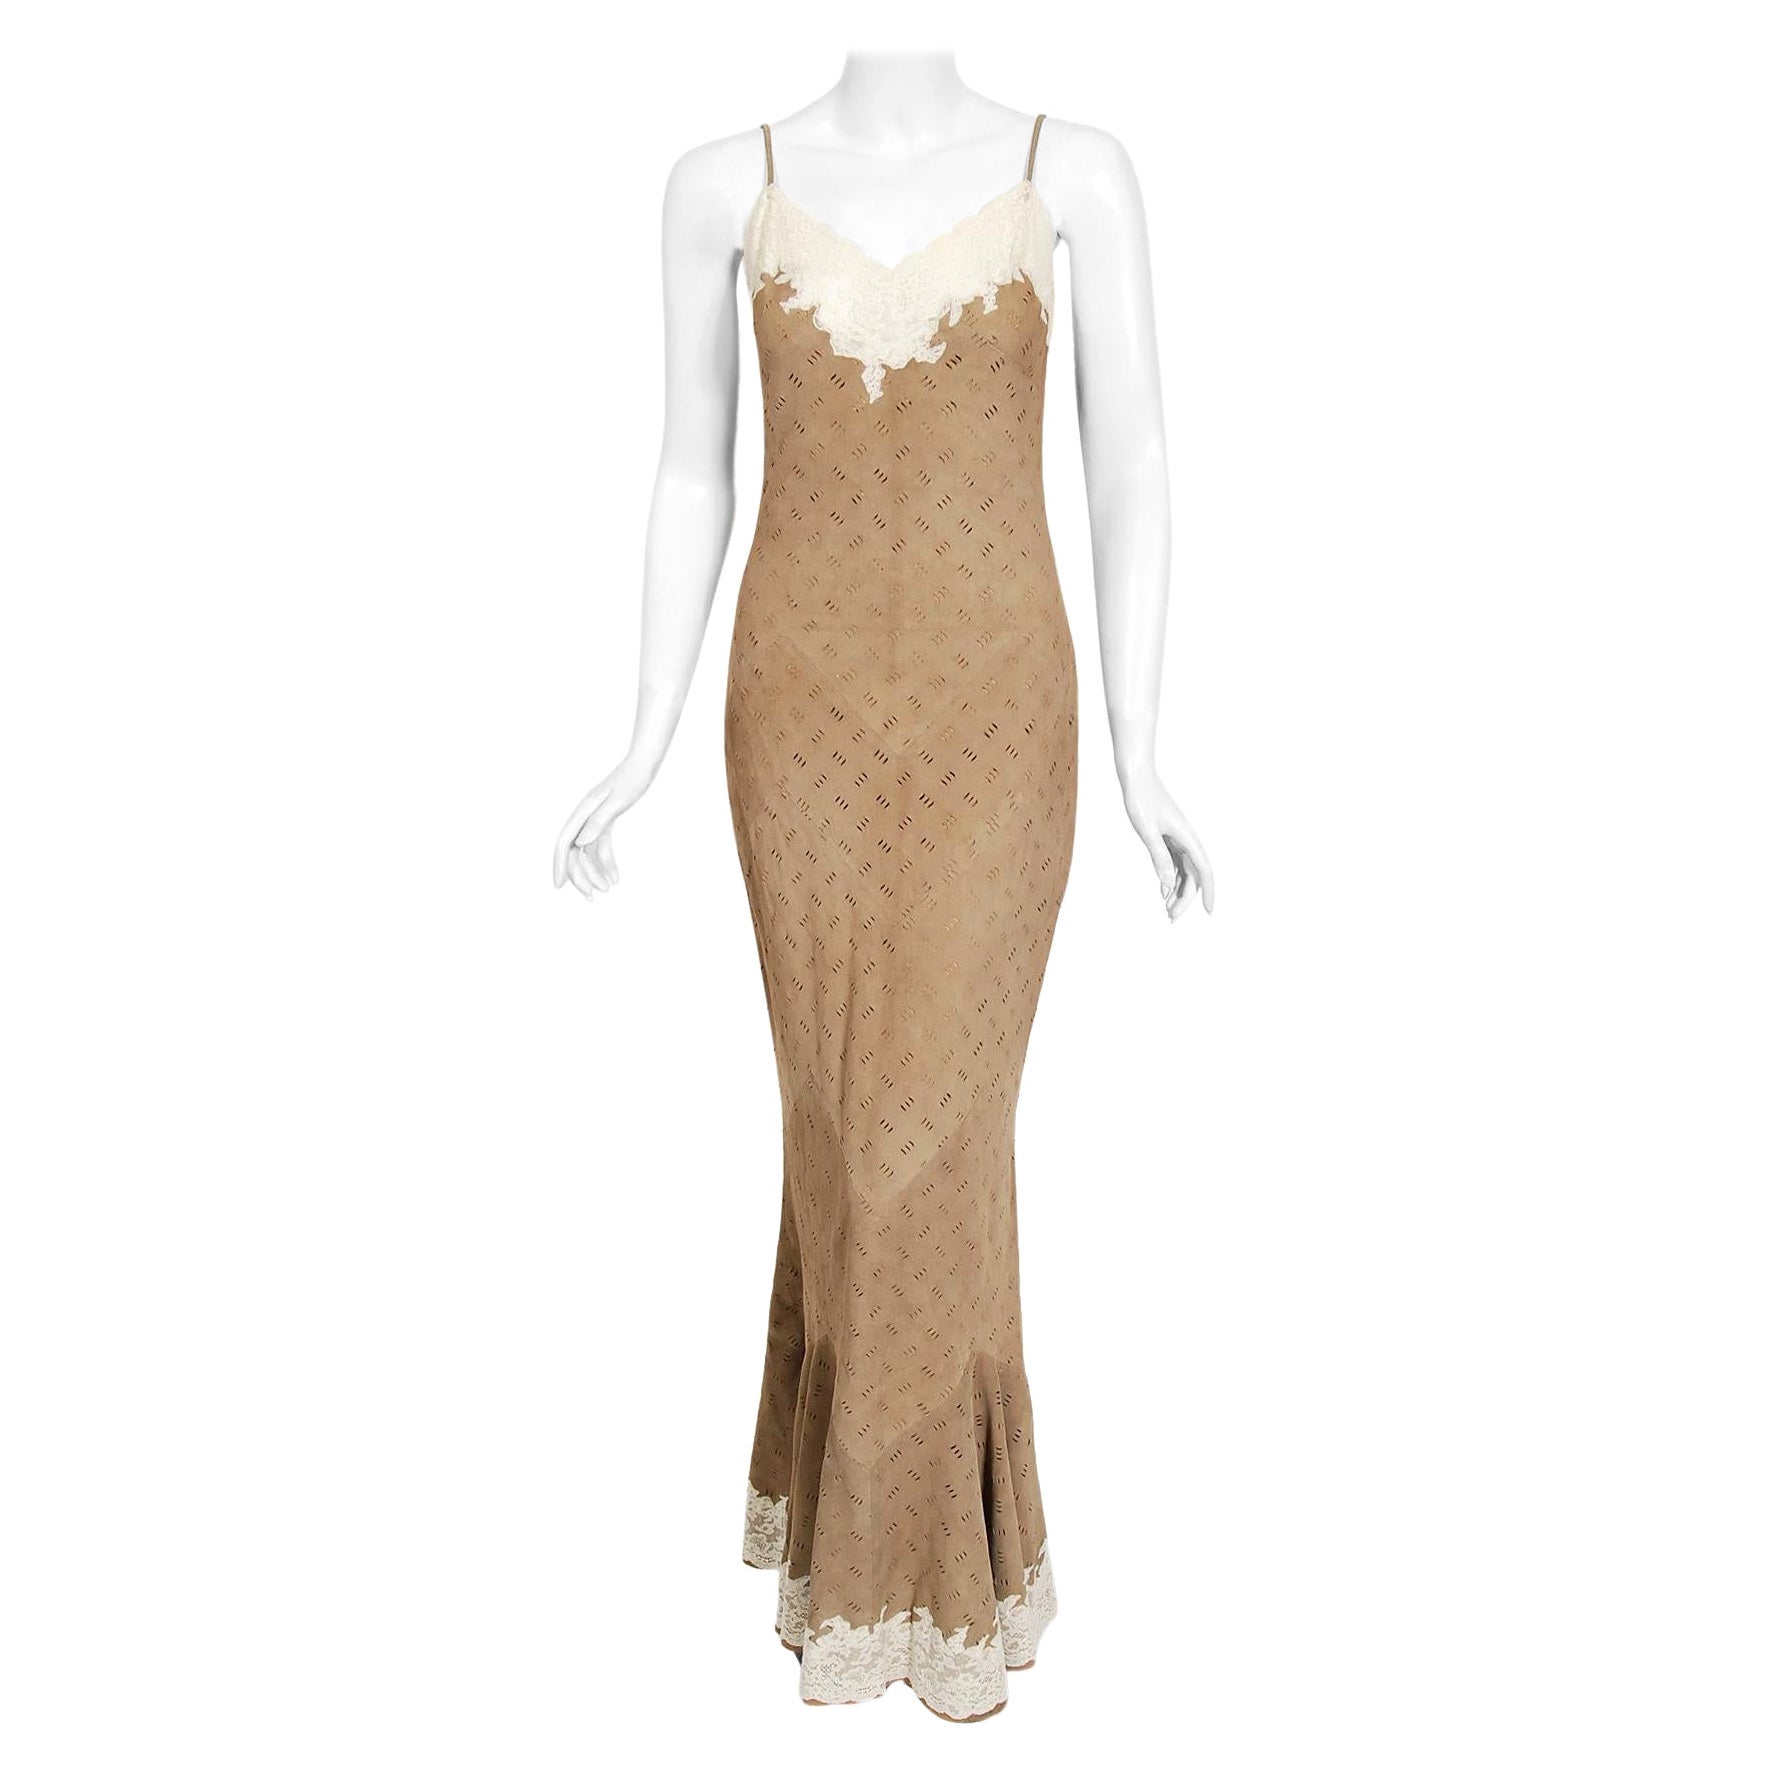 Vintage 1999 Christian Dior by Galliano Suede Lace Bias-Cut Slip Gown and Jacket For Sale